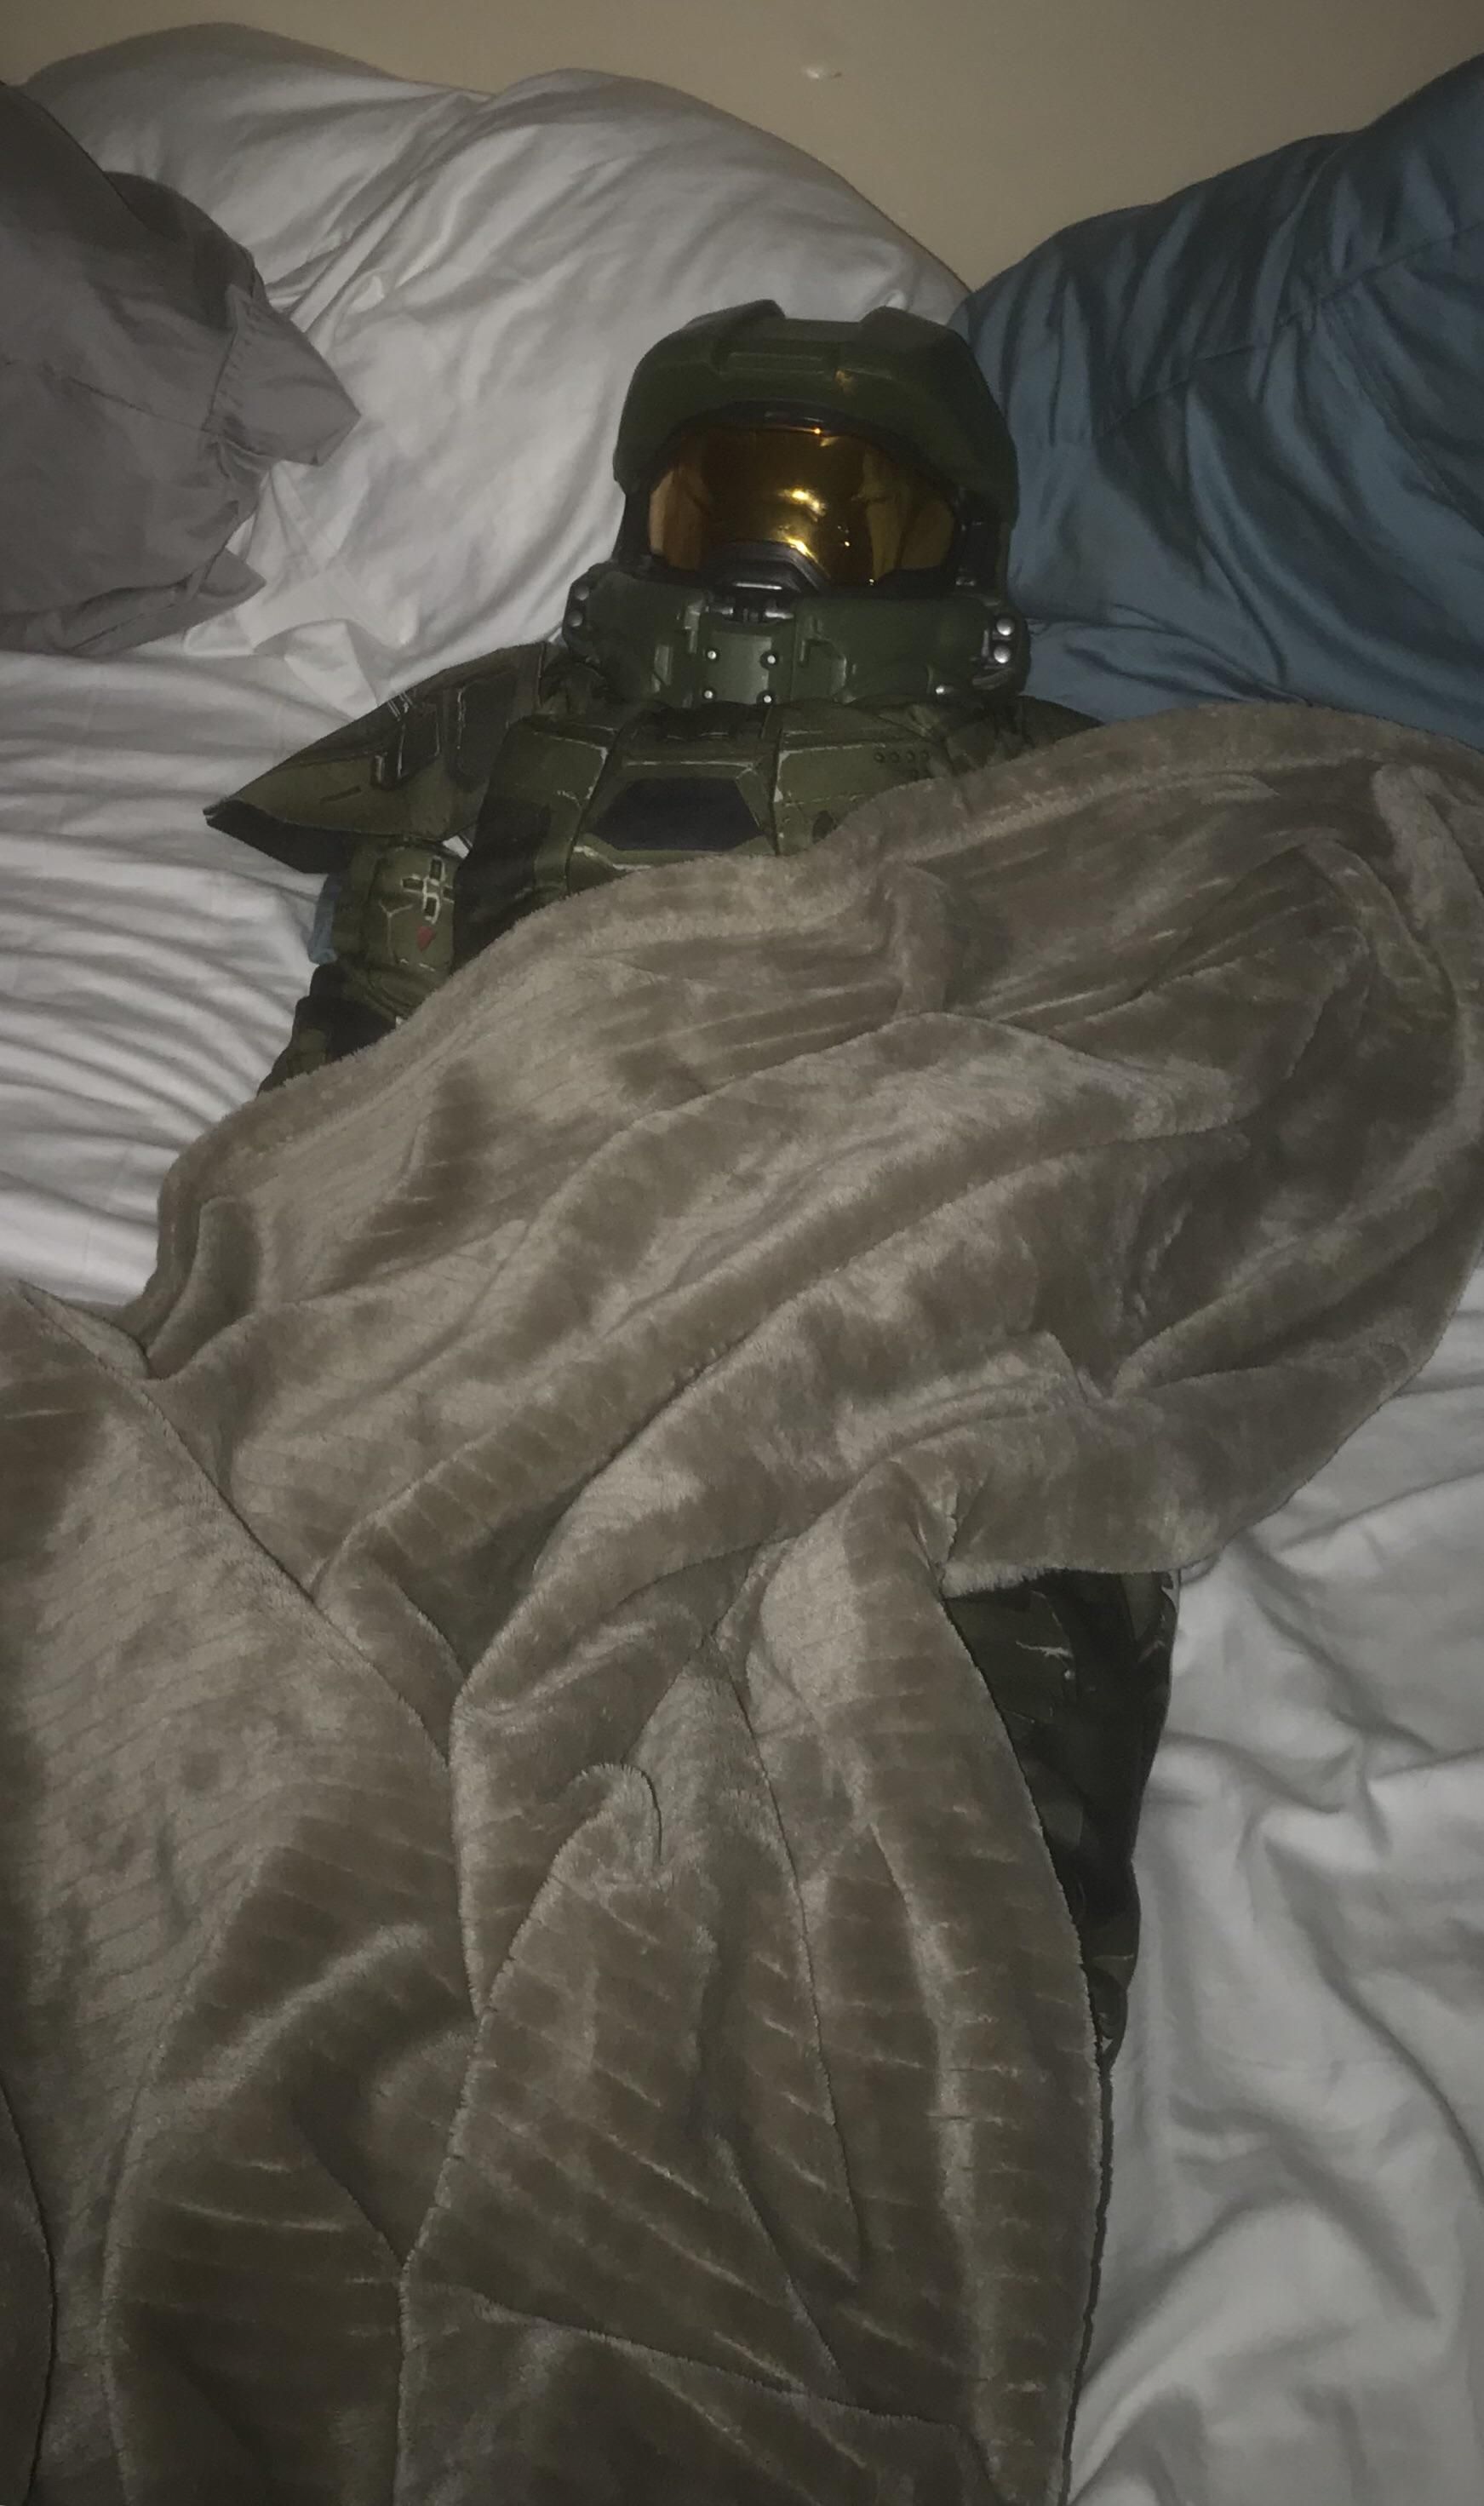 My 5 year old fast asleep. Second night he has slept in this costume.